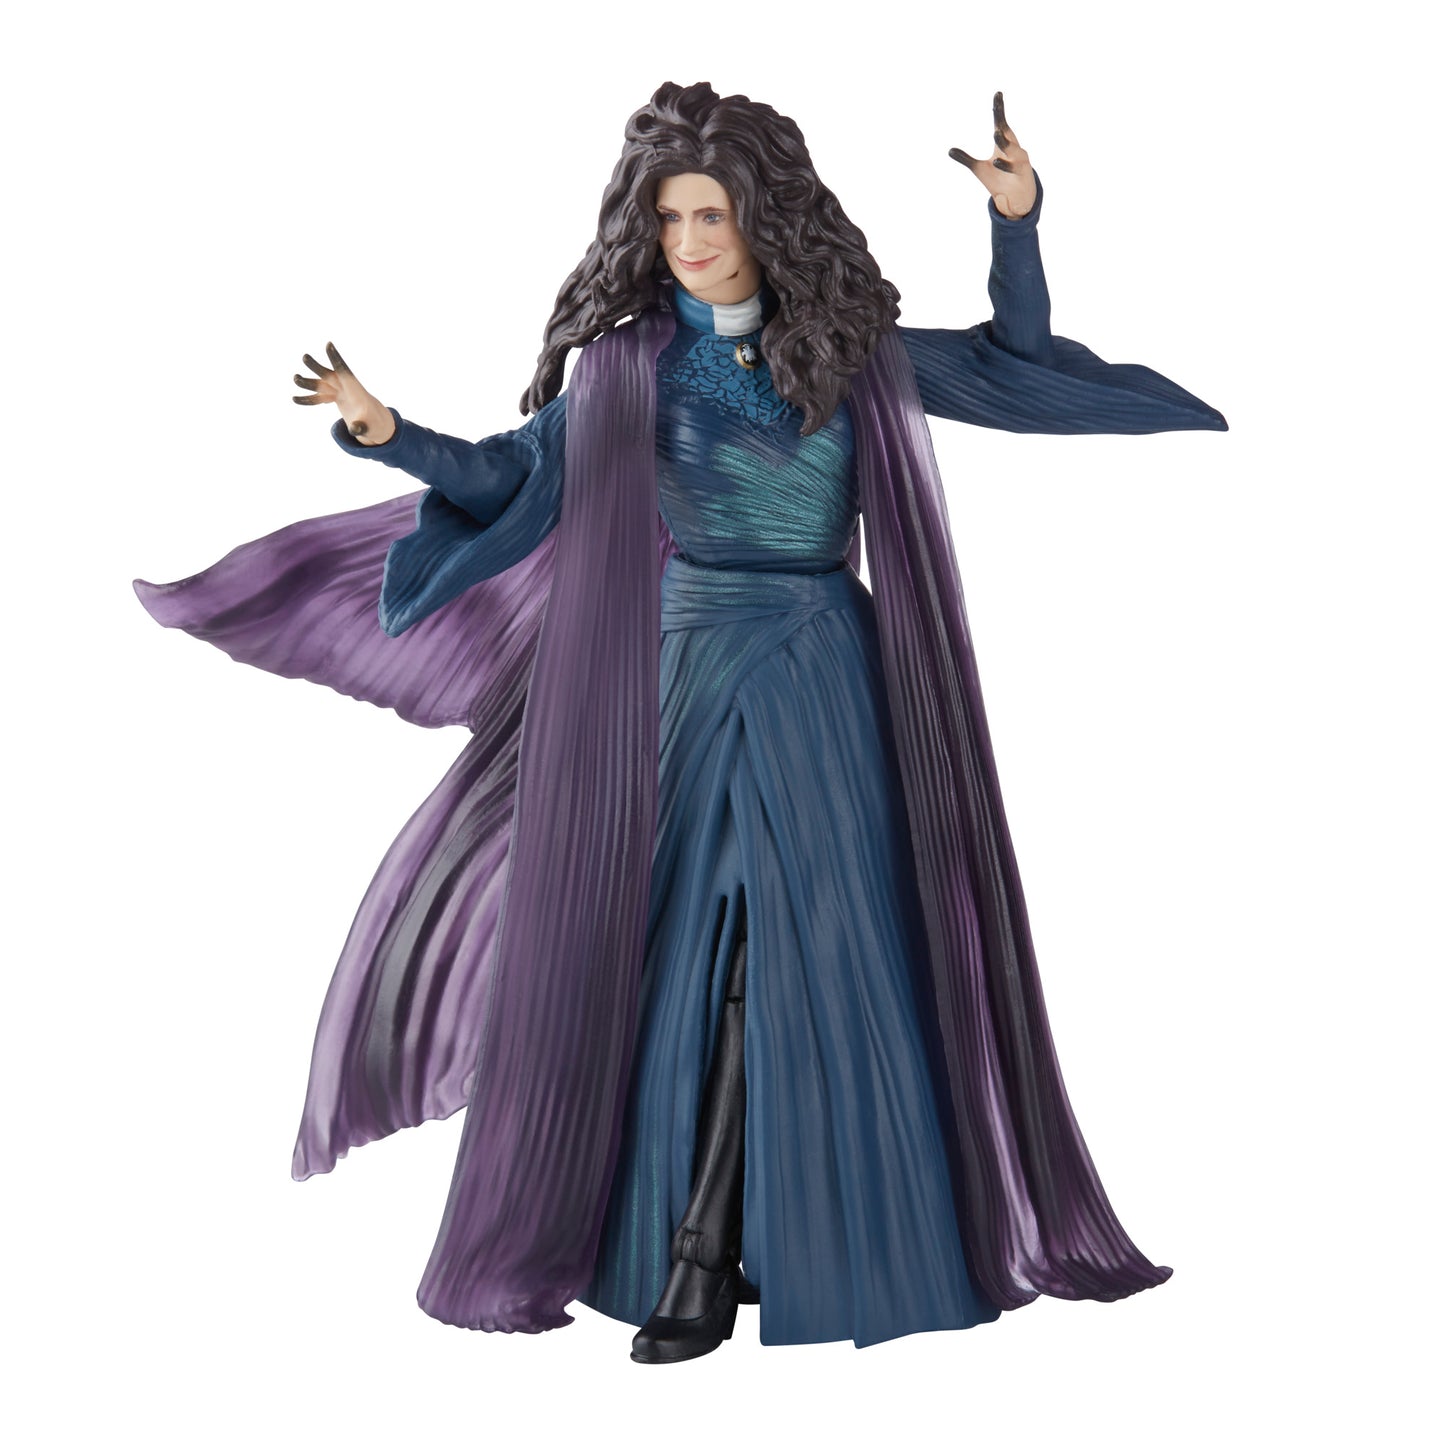 Agatha Harkness Action Figure posed - Heretoserveyou